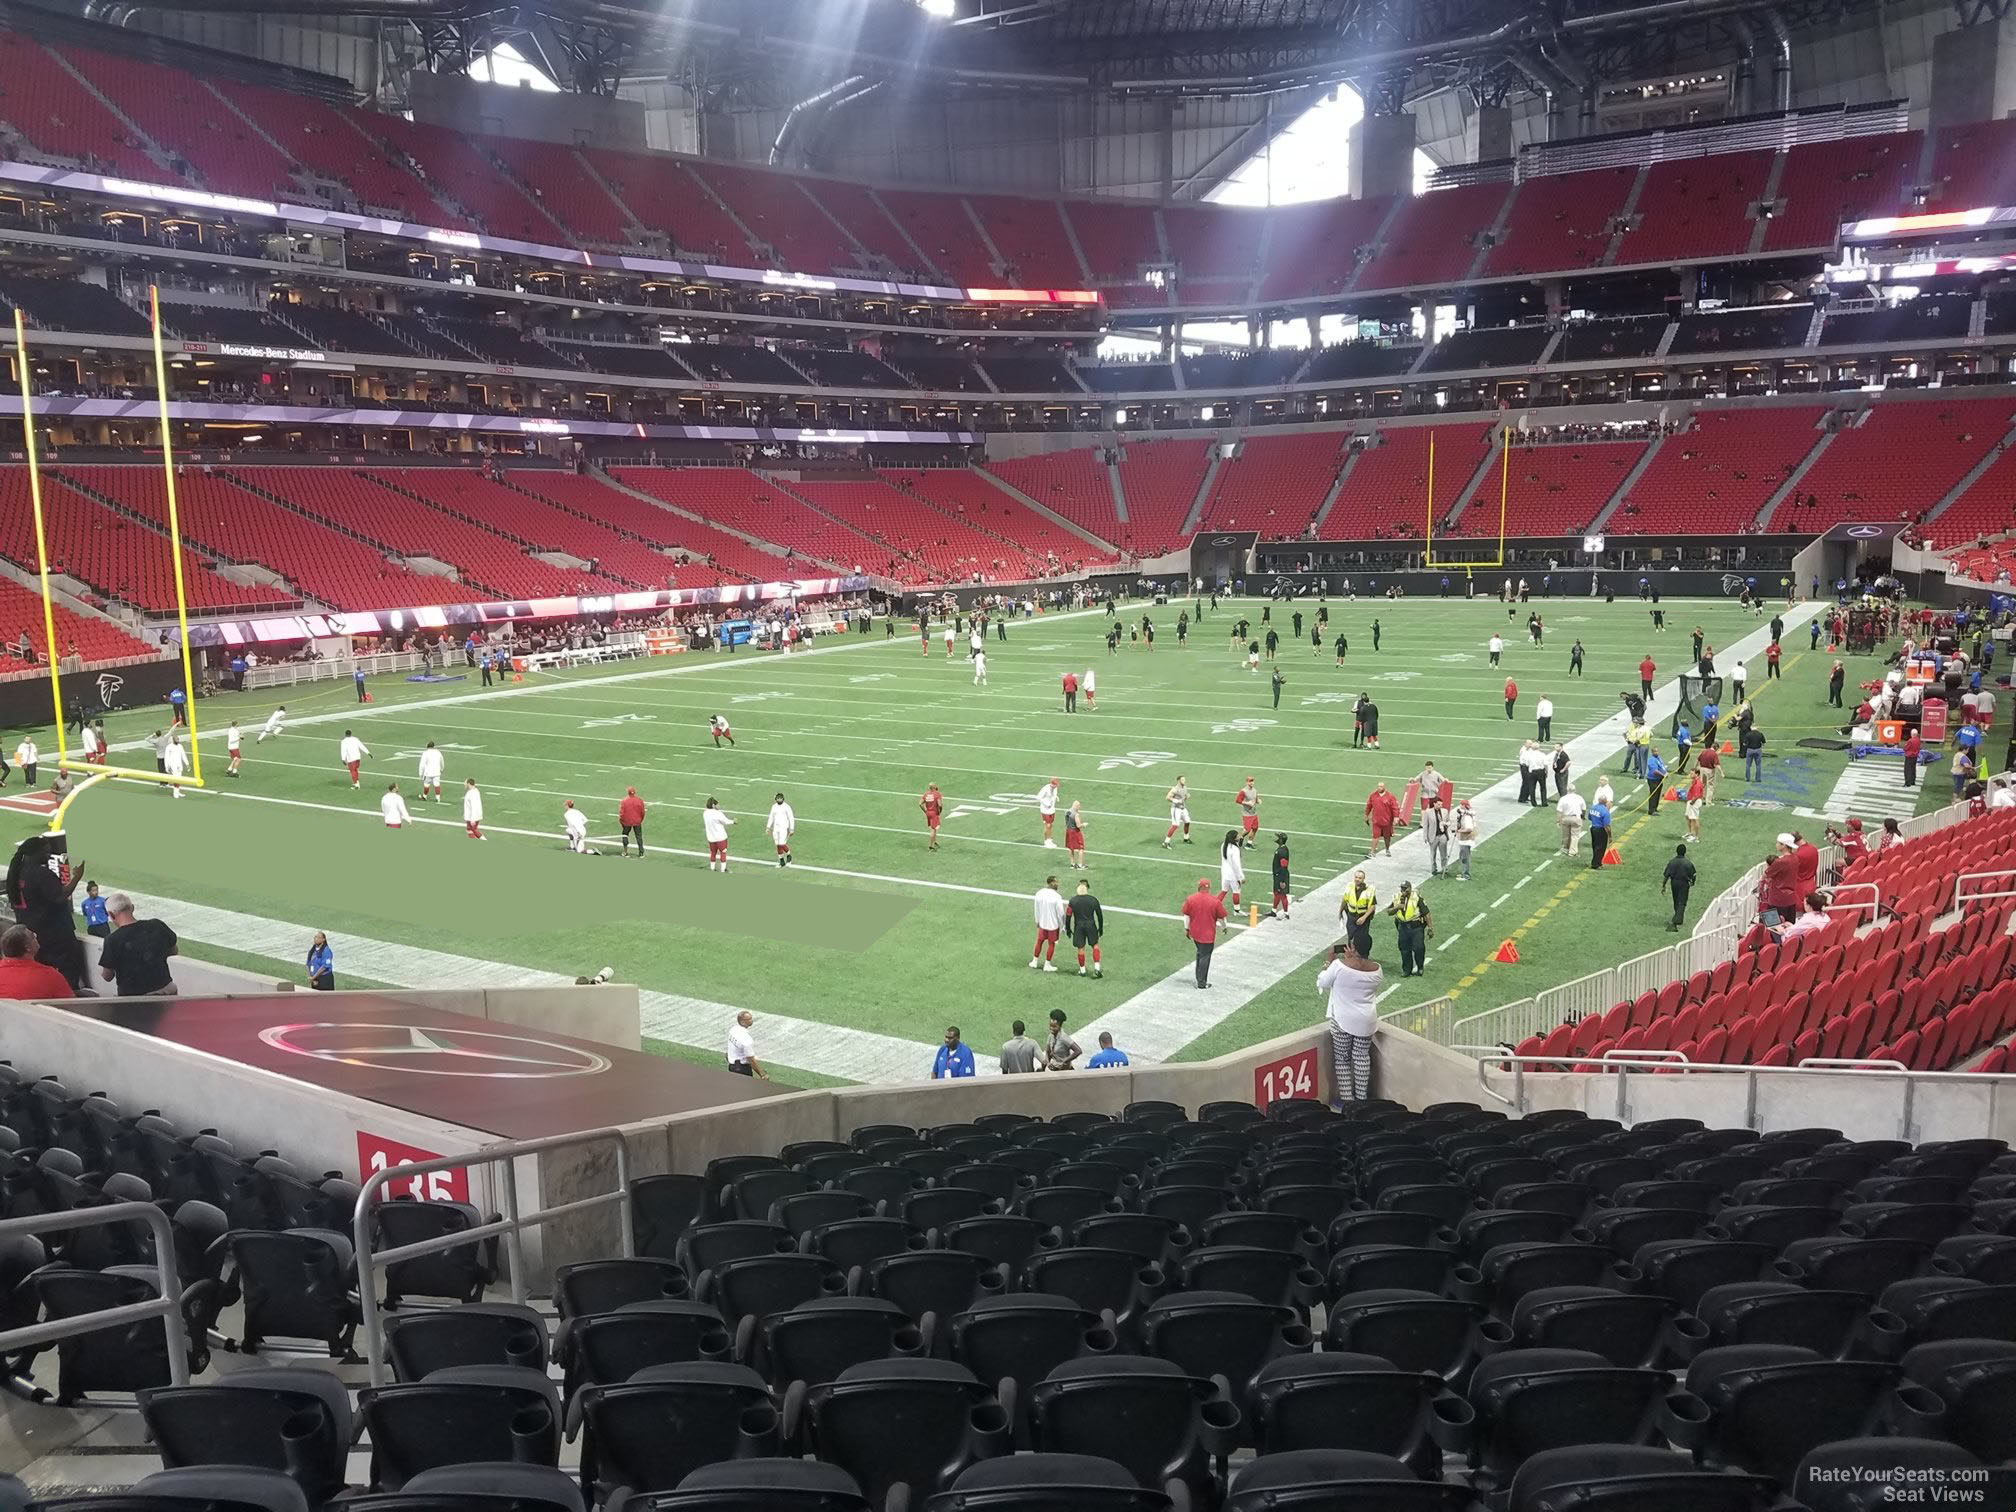 section 134, row 25 seat view  for football - mercedes-benz stadium